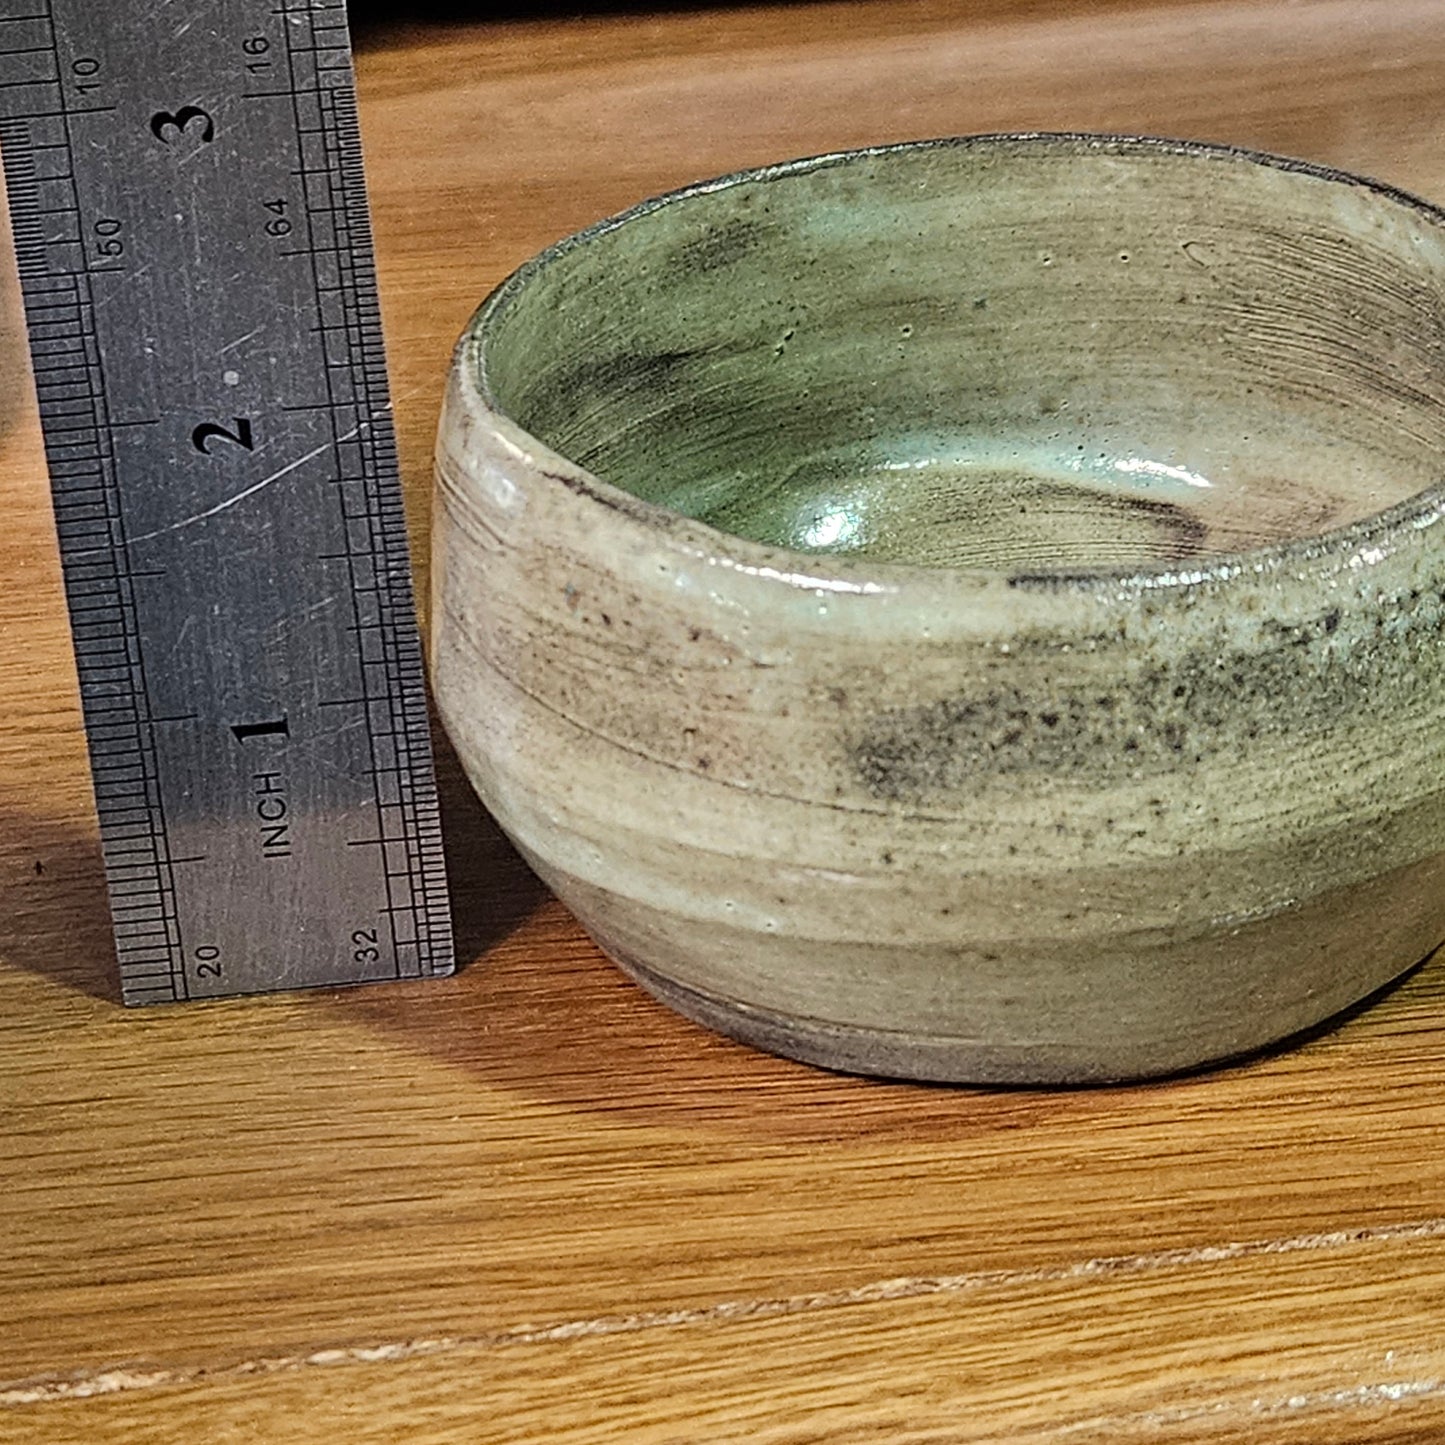 Seagreen Mossy Bowl